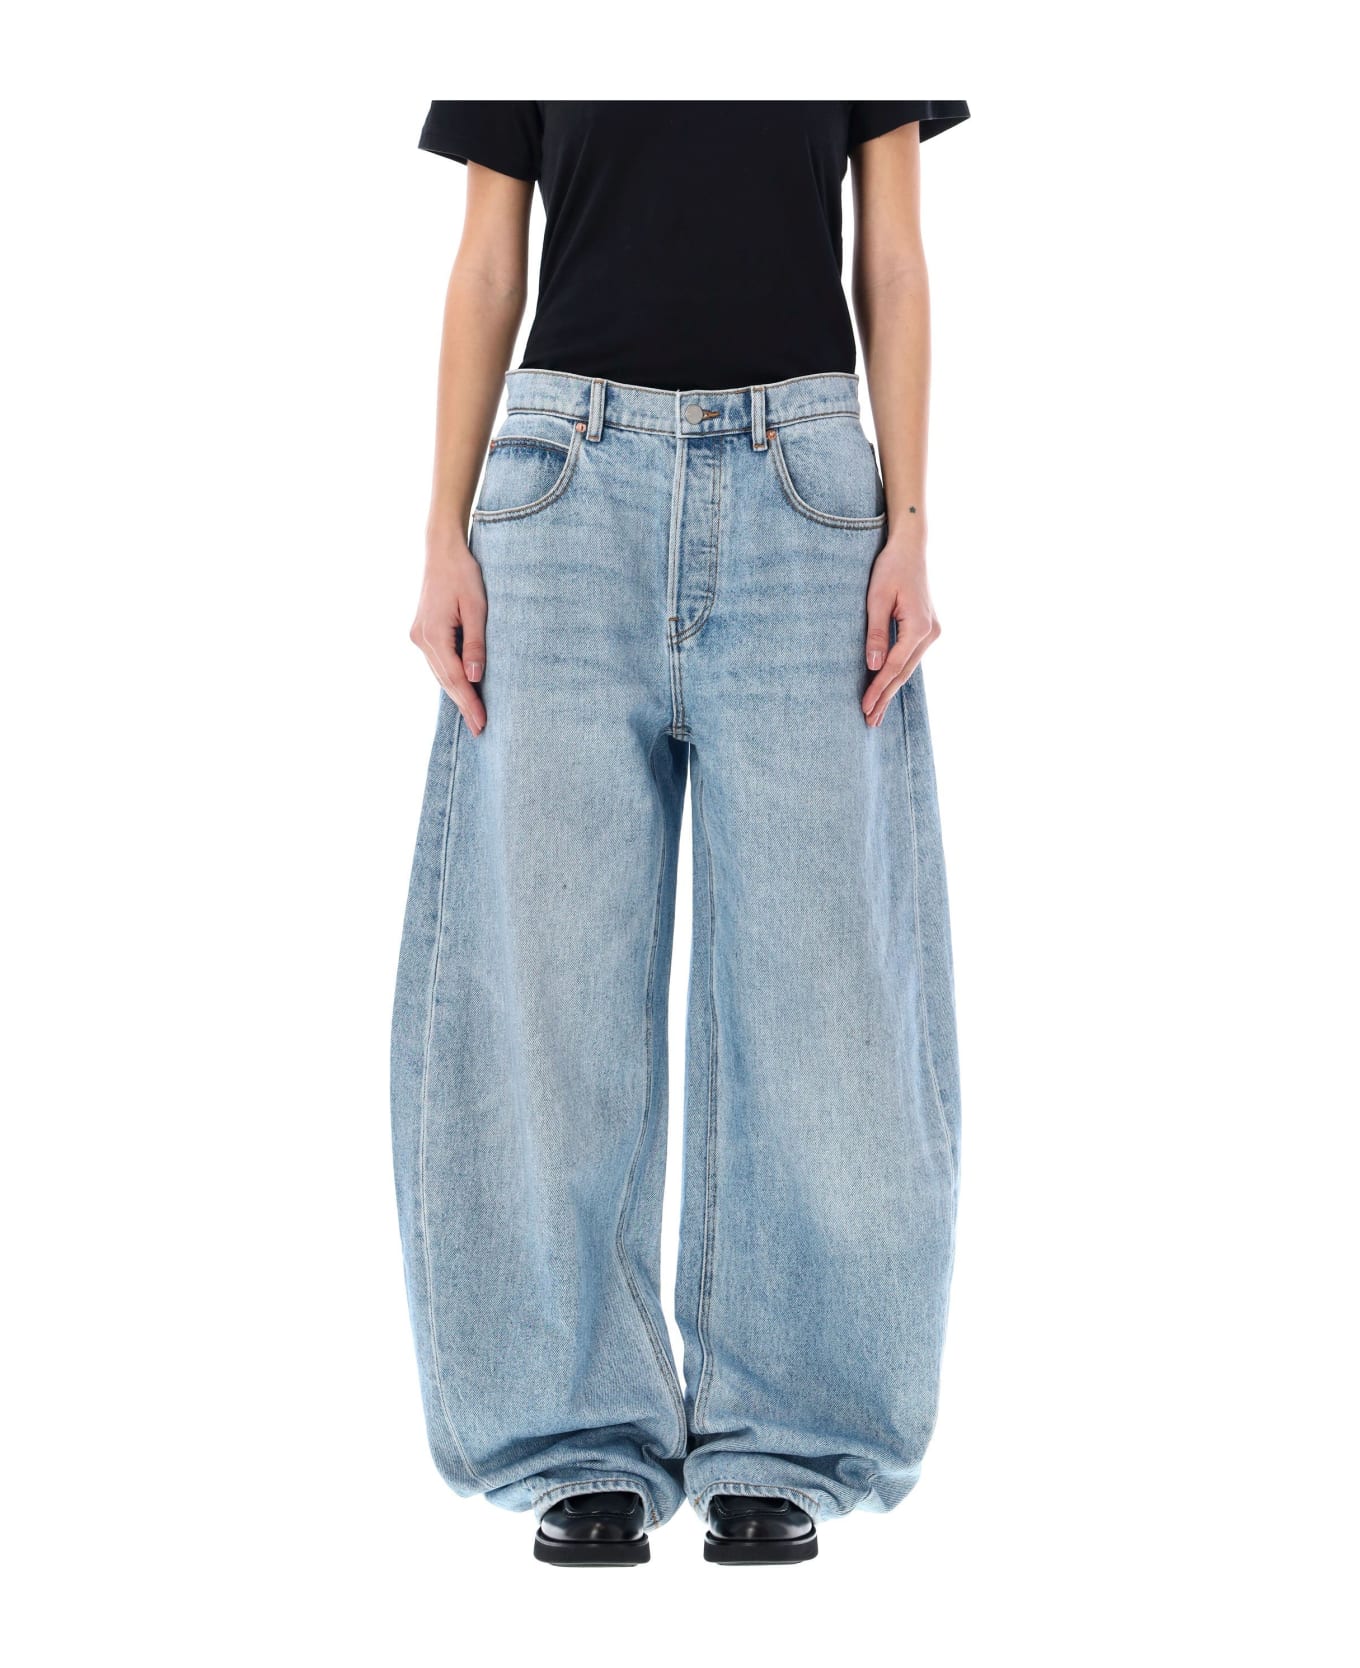 Alexander Wang Oversized Rounded Low Rise Jeans - PEBBLE LIGHT BLUE